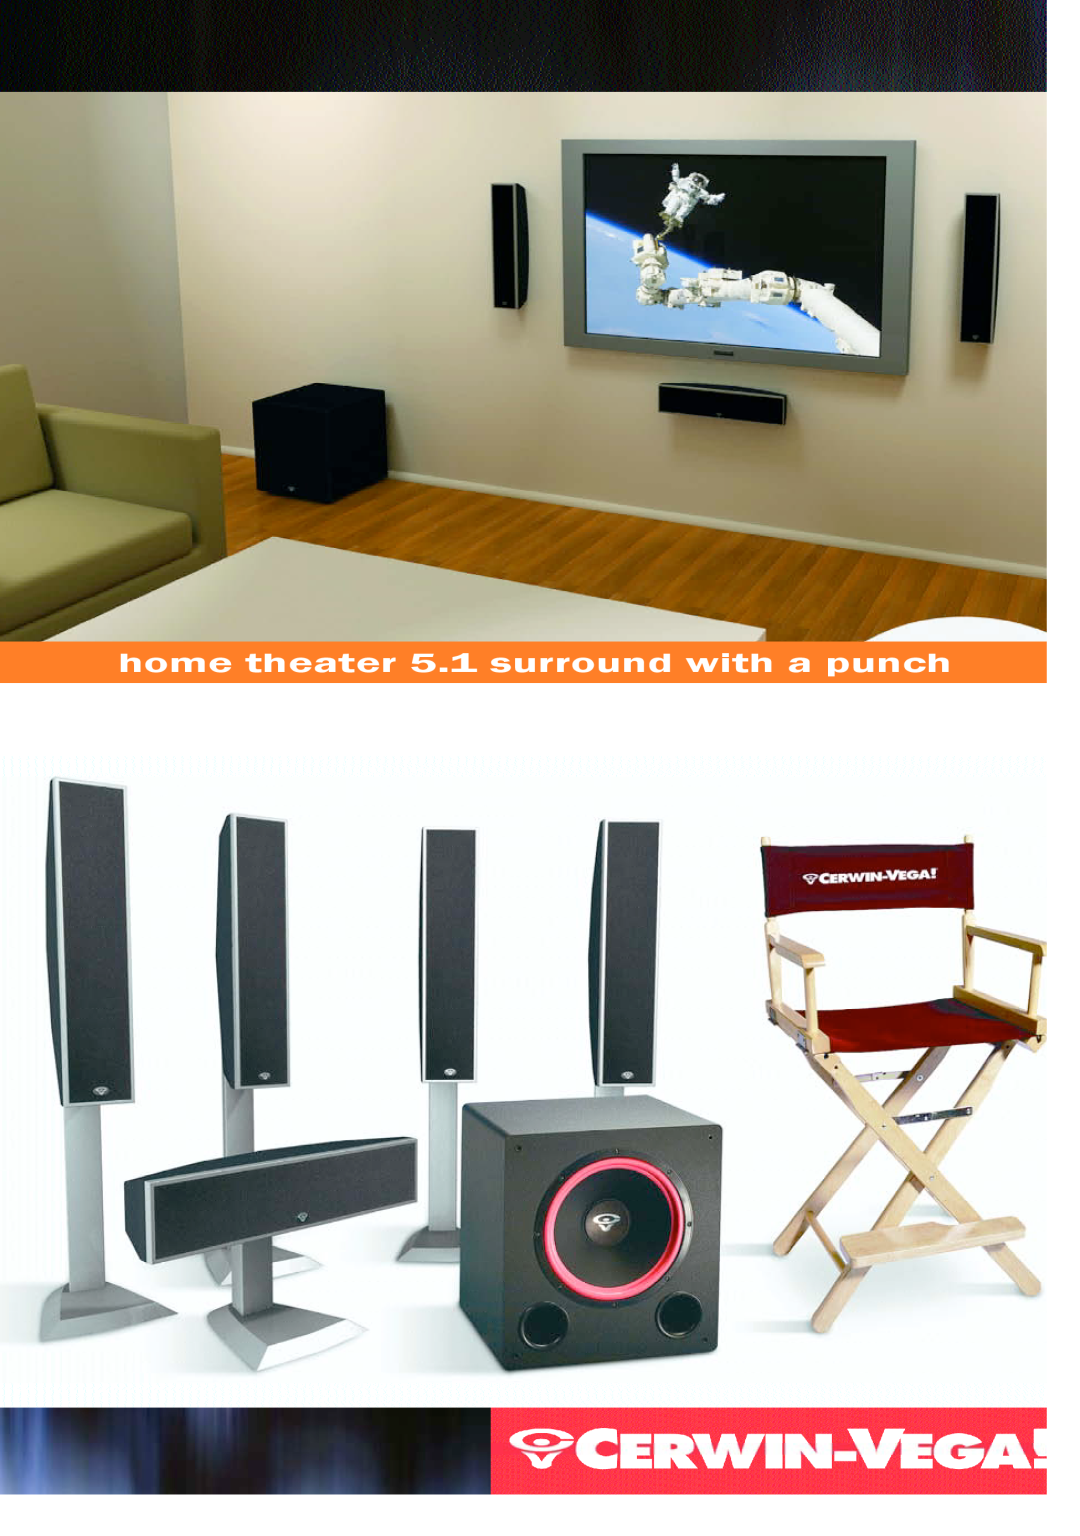 Cerwin-Vega CVHD Series manual home theater 5.1 surround with a punch 